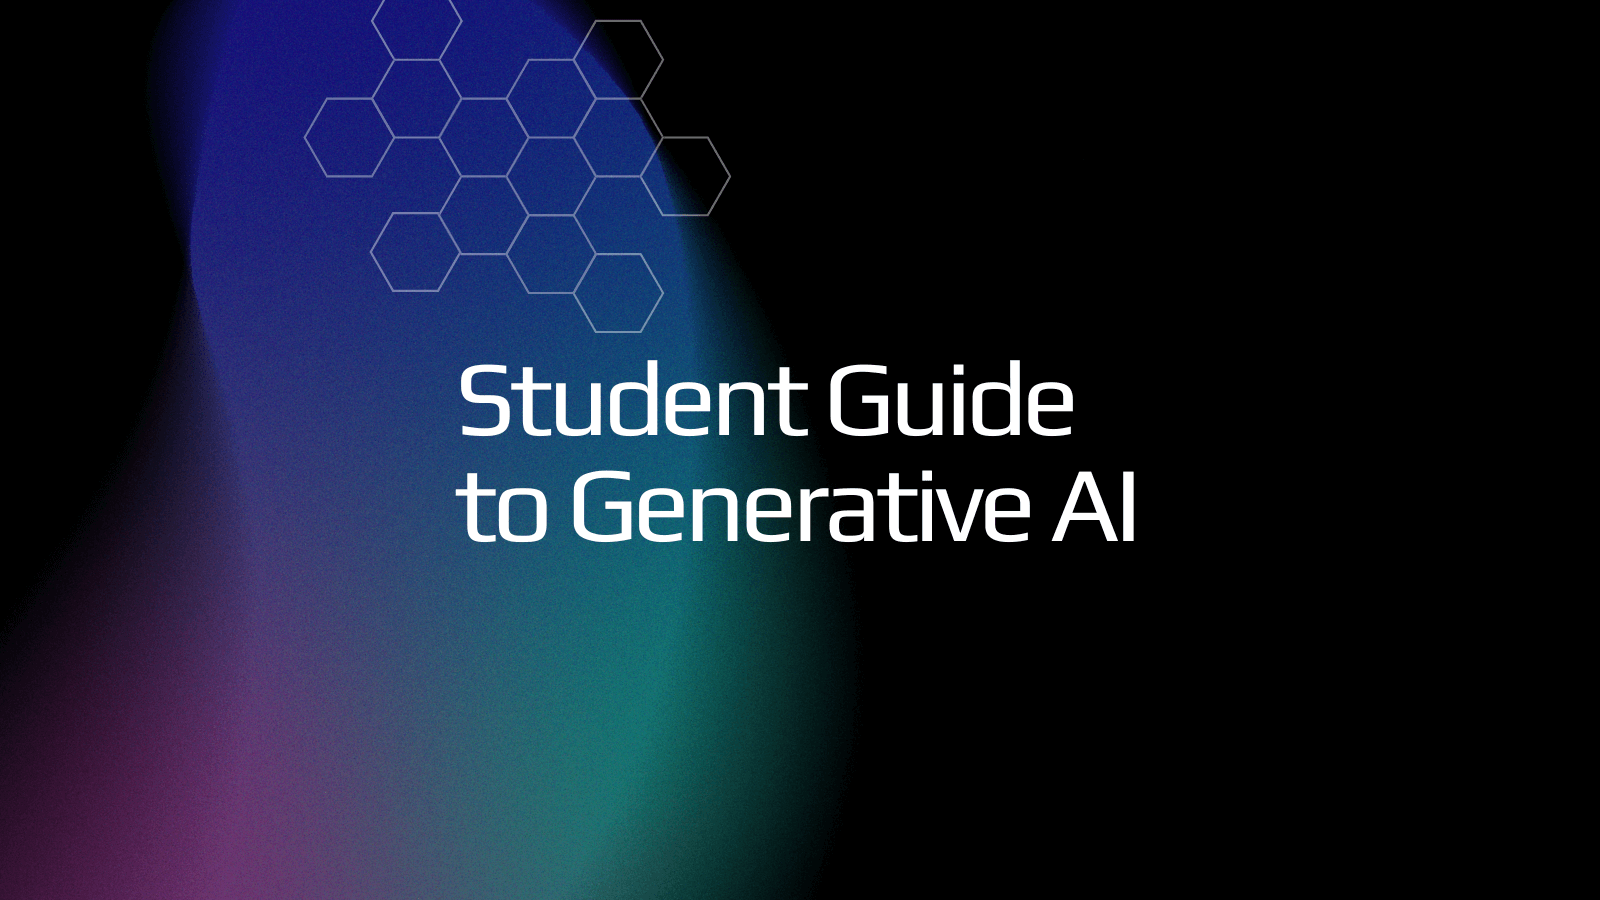 "Student Guide to Generative AI" is written in white text on a black background. The image features a honeycomb design and blue, green, and purple form in the background.